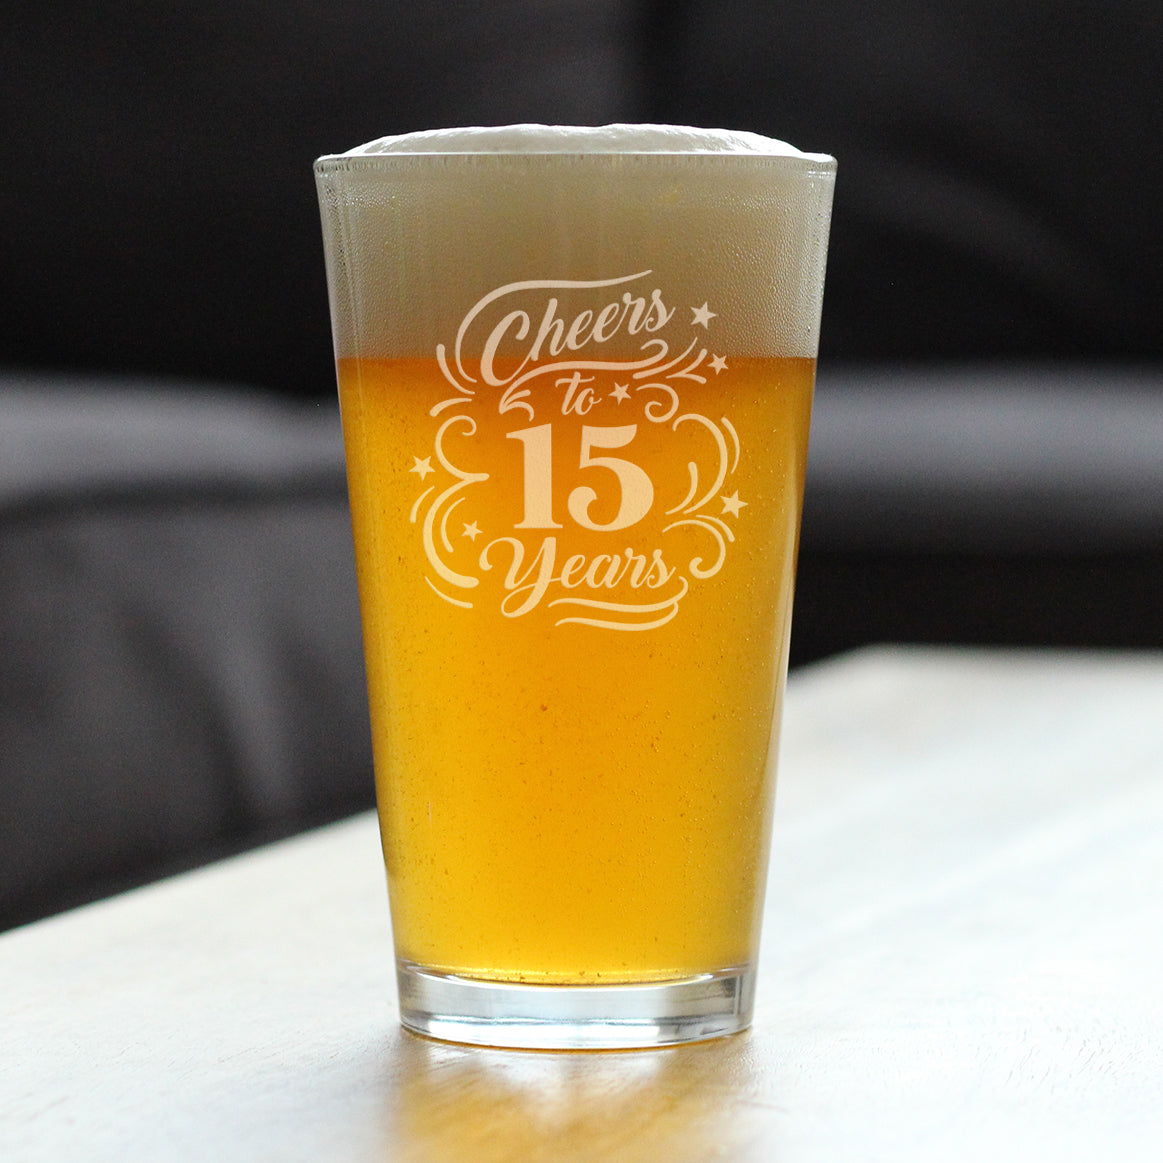 Cheers to 15 Years - Pint Glass for Beer - Gifts for Women &amp; Men - 15th Anniversary Party Decor - 16 Oz Glasses